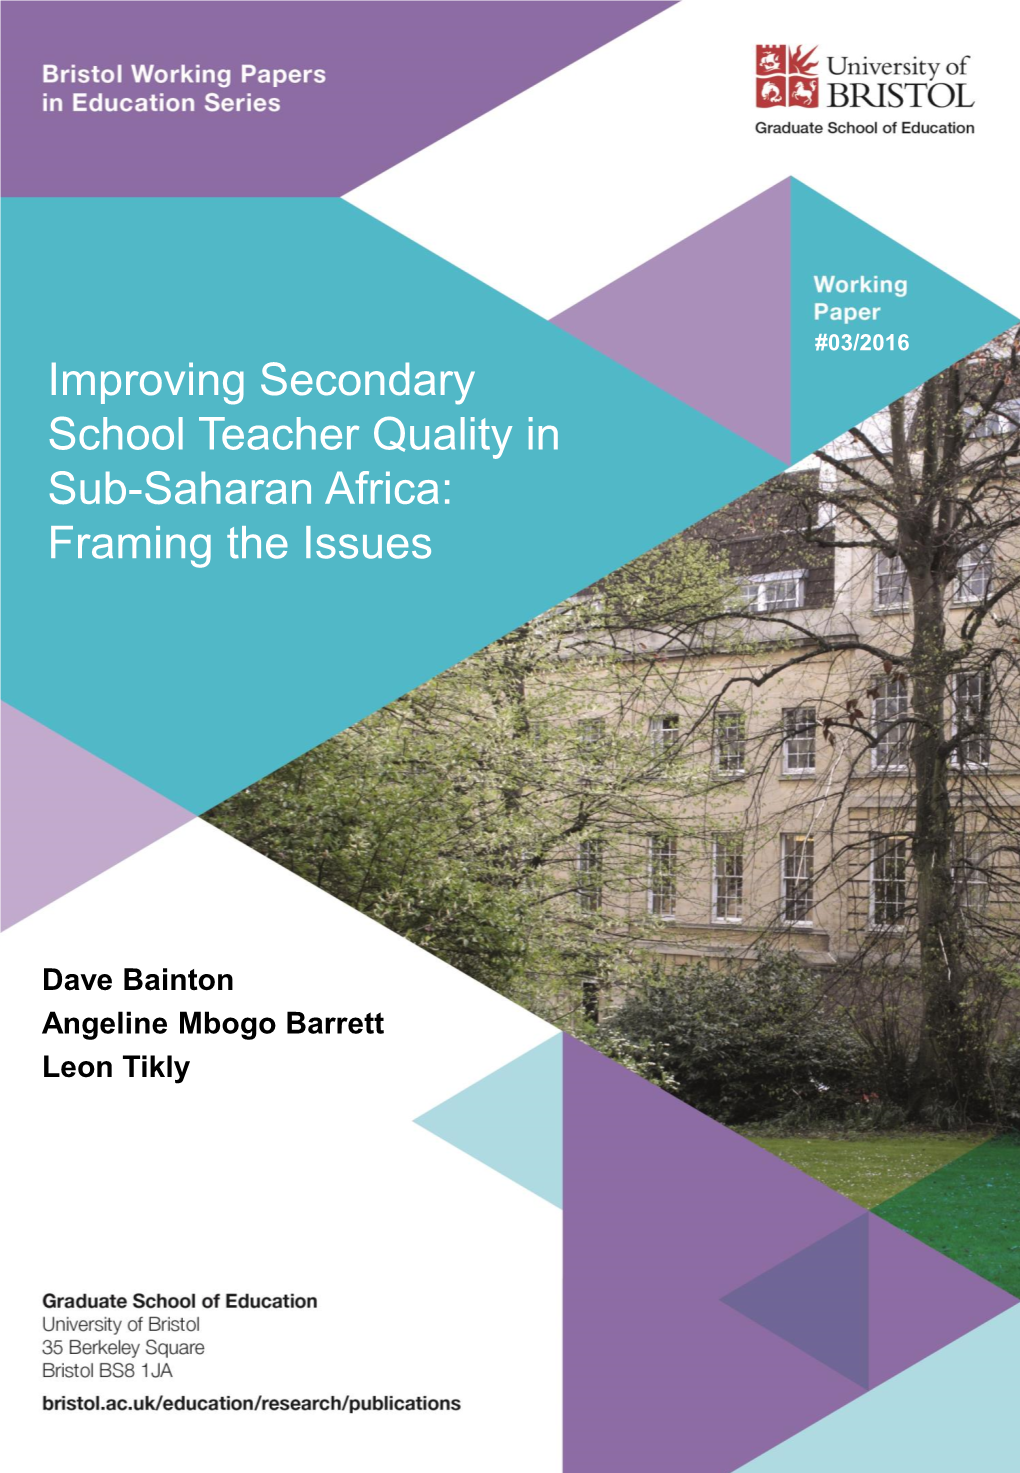 Improving Secondary School Teacher Quality in Sub-Saharan Africa: Framing the Issues